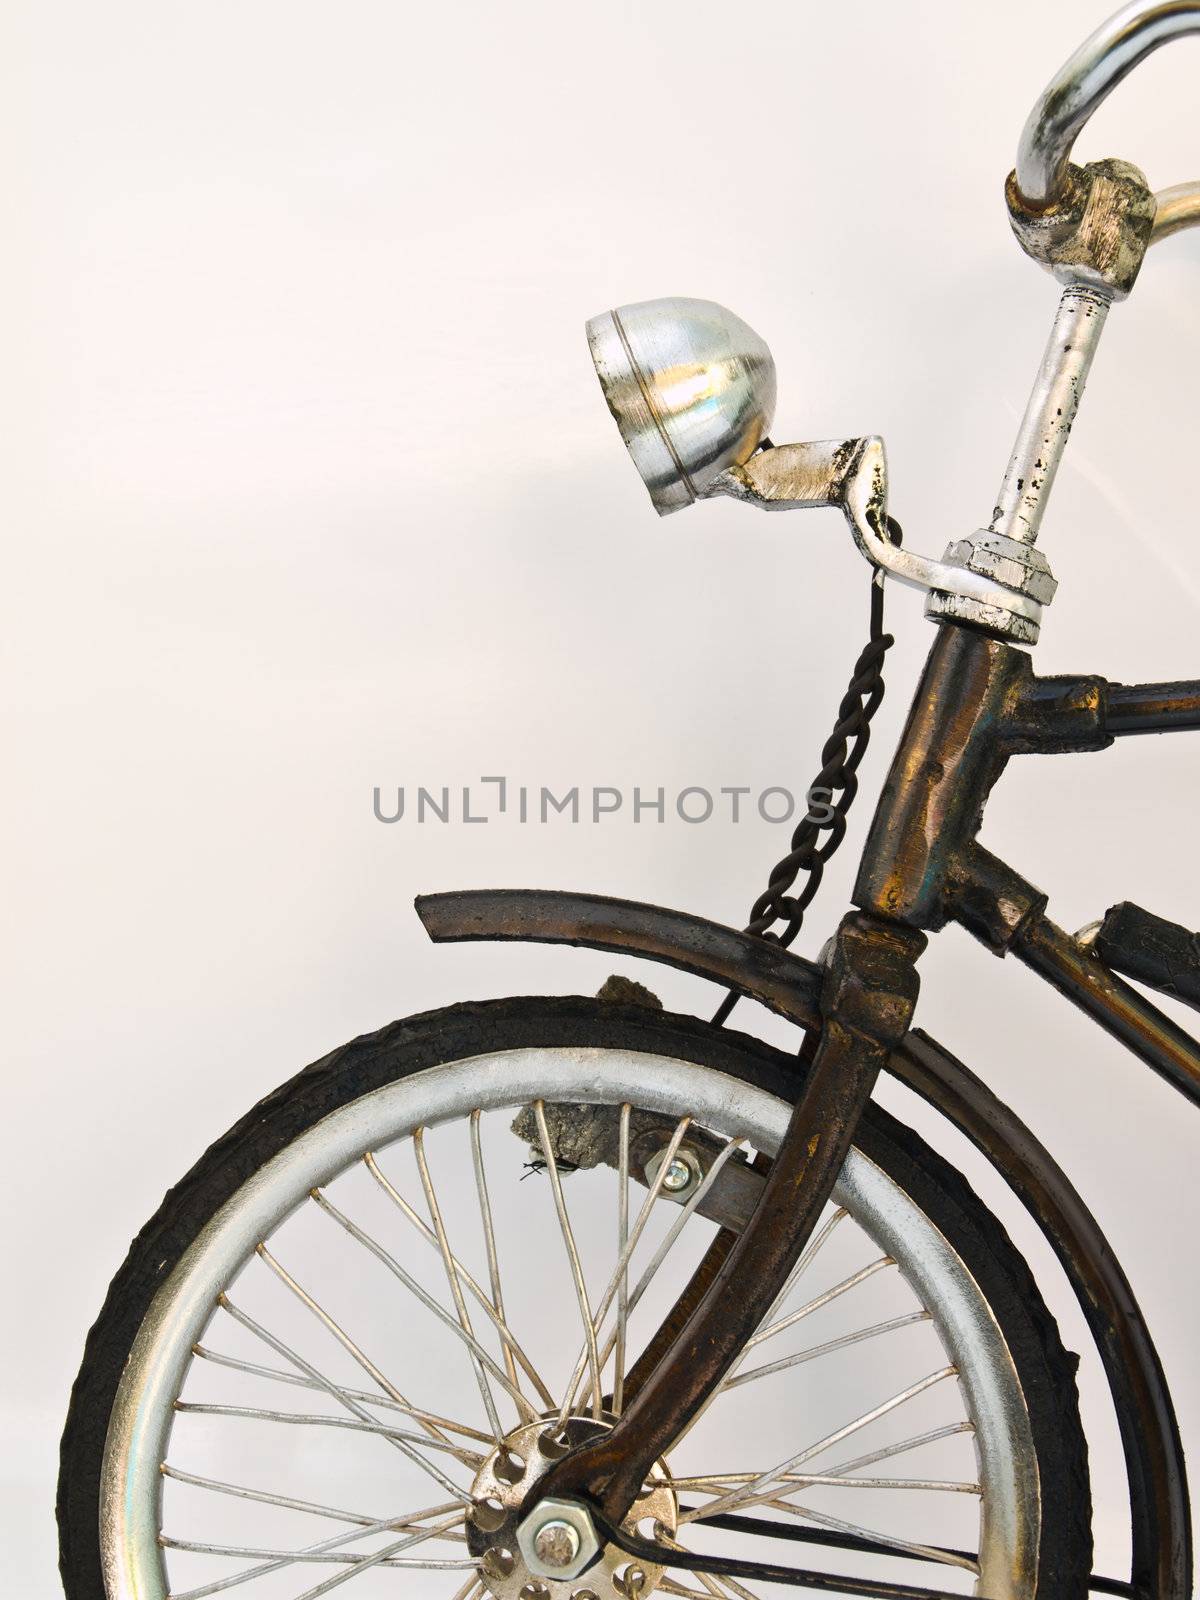 A front wheel of Iron bicycle model isolated on white background by gururugu